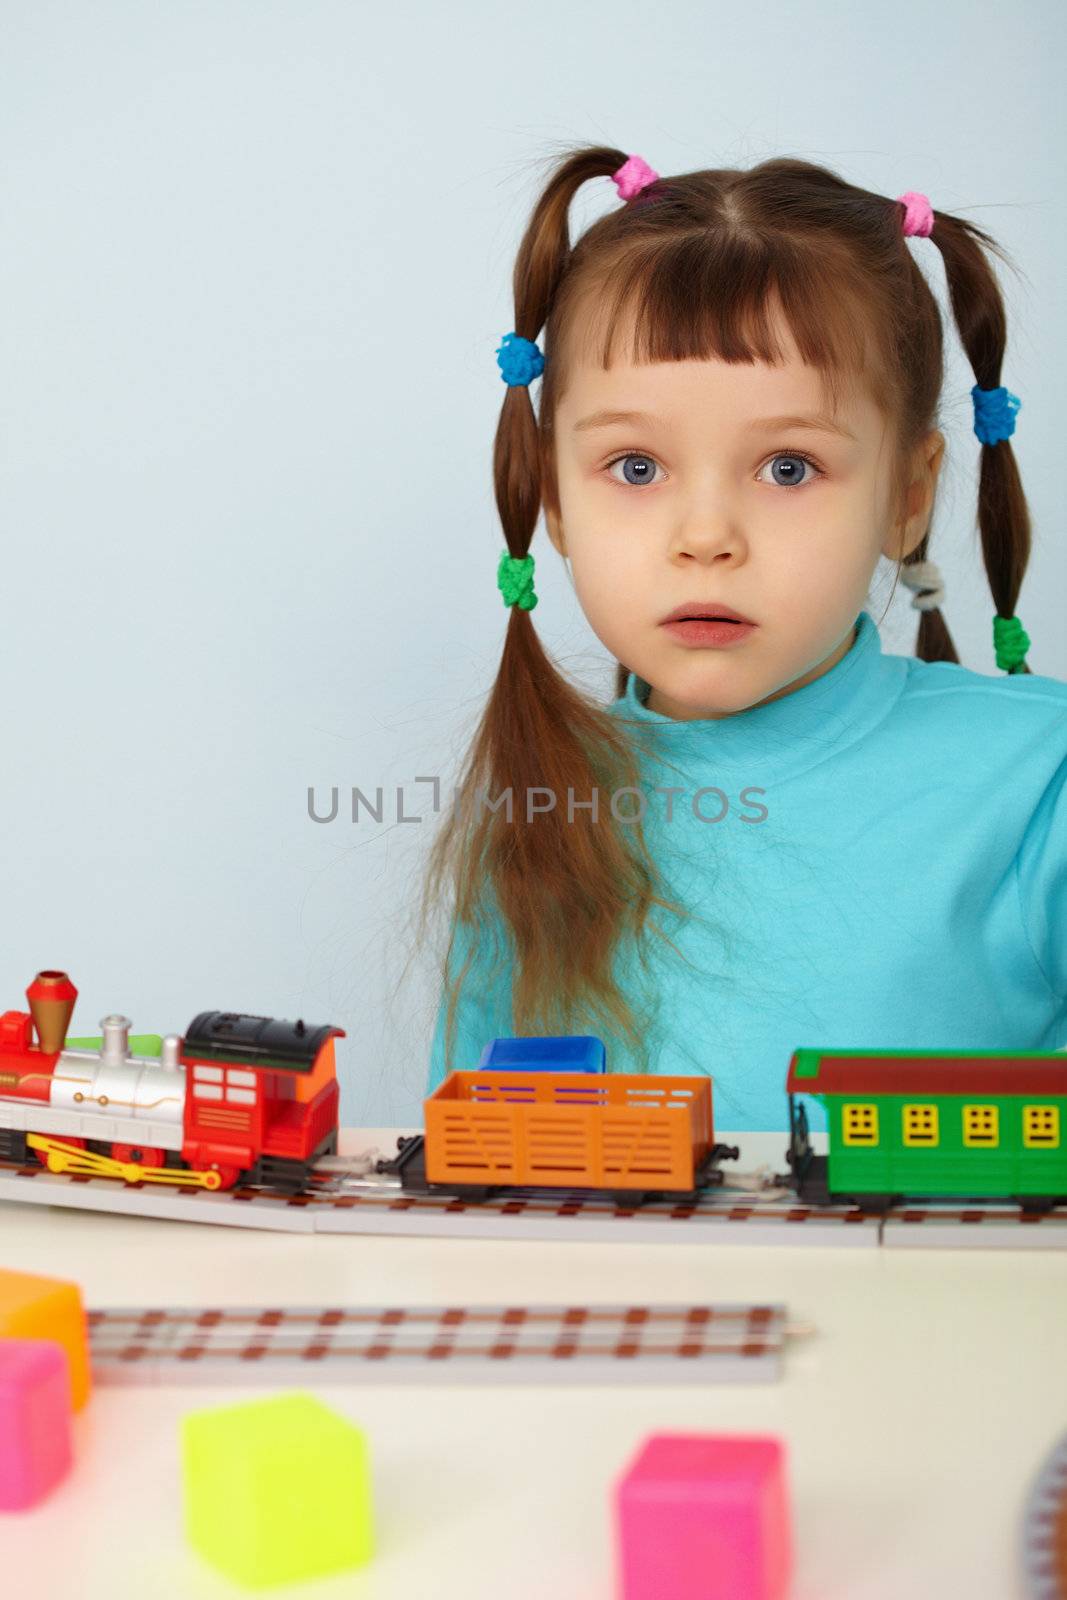 Amazed child and toy railway by pzaxe